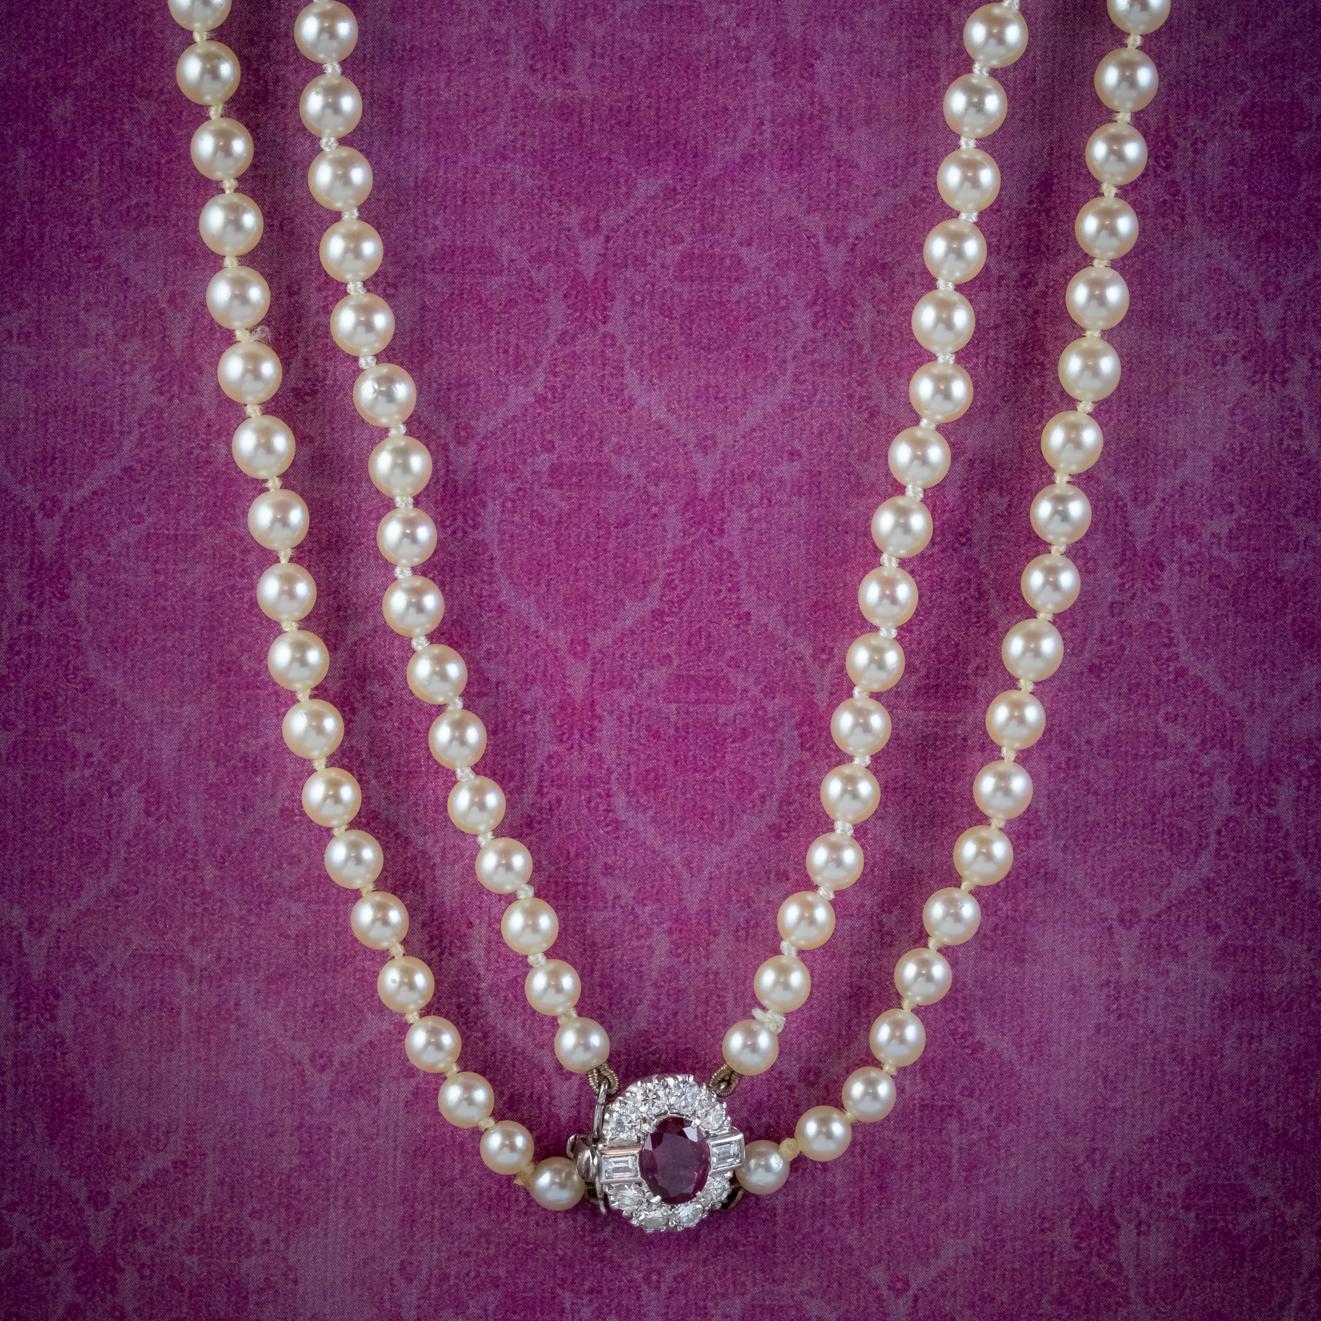 A grand Art Deco Pearl Necklace featuring two strands of lovely lustrous Cultured Pearls which graduate in size towards the bottom.

The piece is held together by a stunning 18ct White Gold box clasp converted from a ring face. It’s decorated with